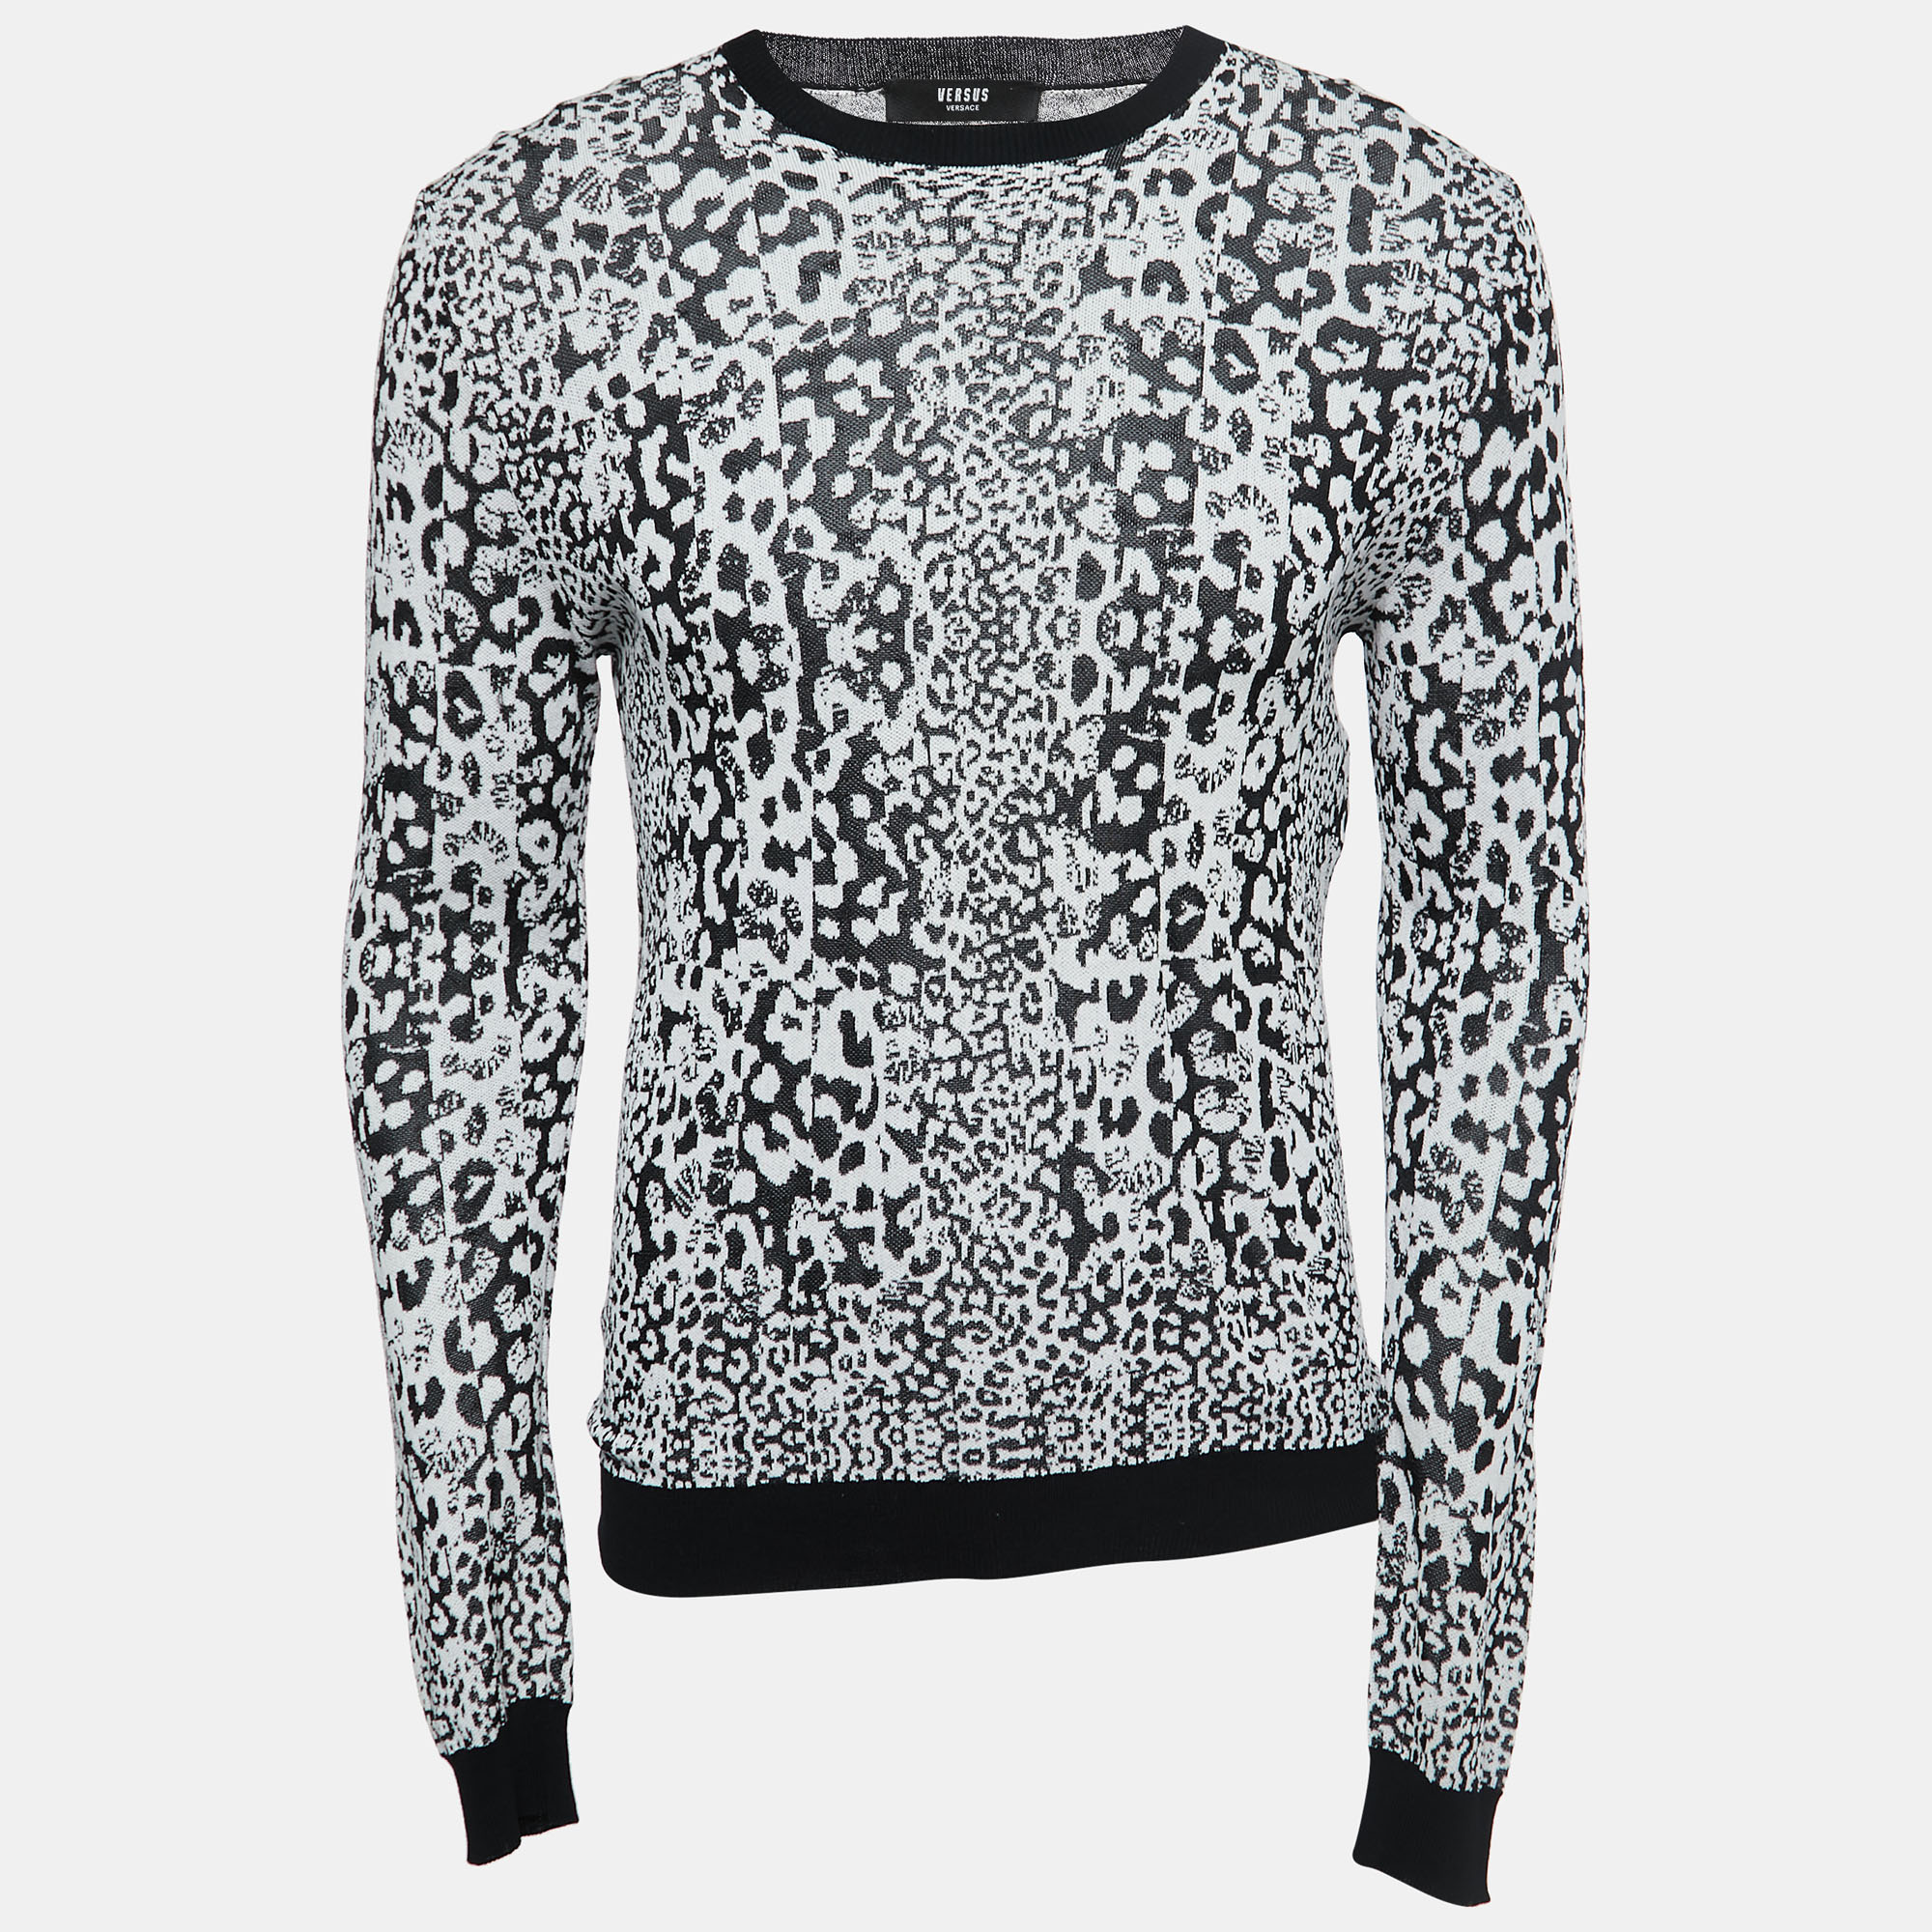 Versus Versace Black/White Patterned Knit Pullover M